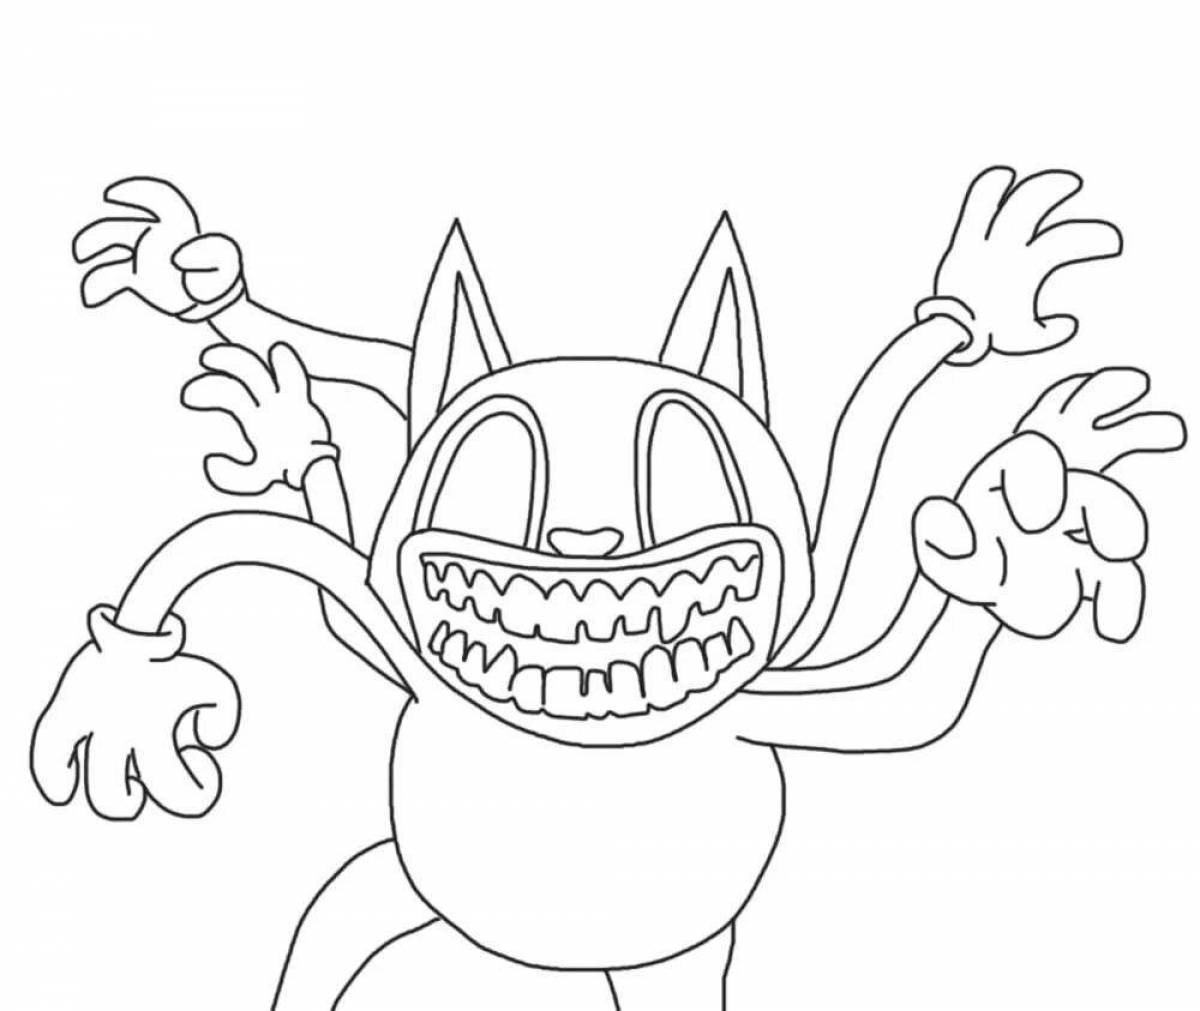 Coloring book witty cartoon cat